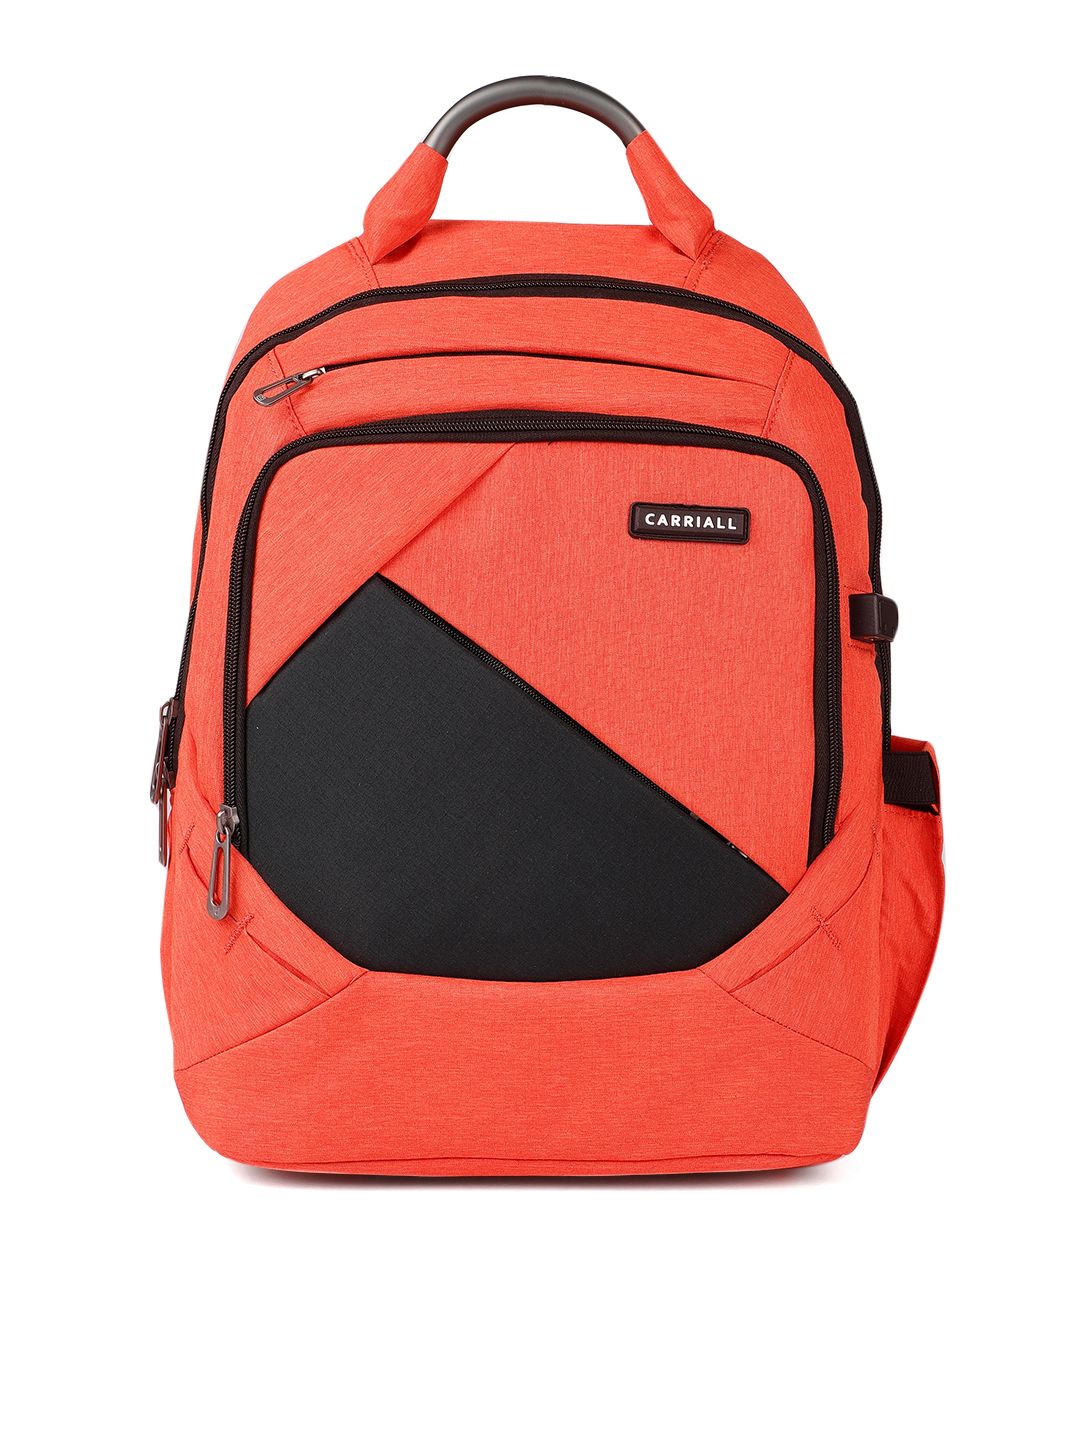 CARRIALL Unisex Orange & Black Colourblocked Smart Laptop Backpack with Charging port Price in India